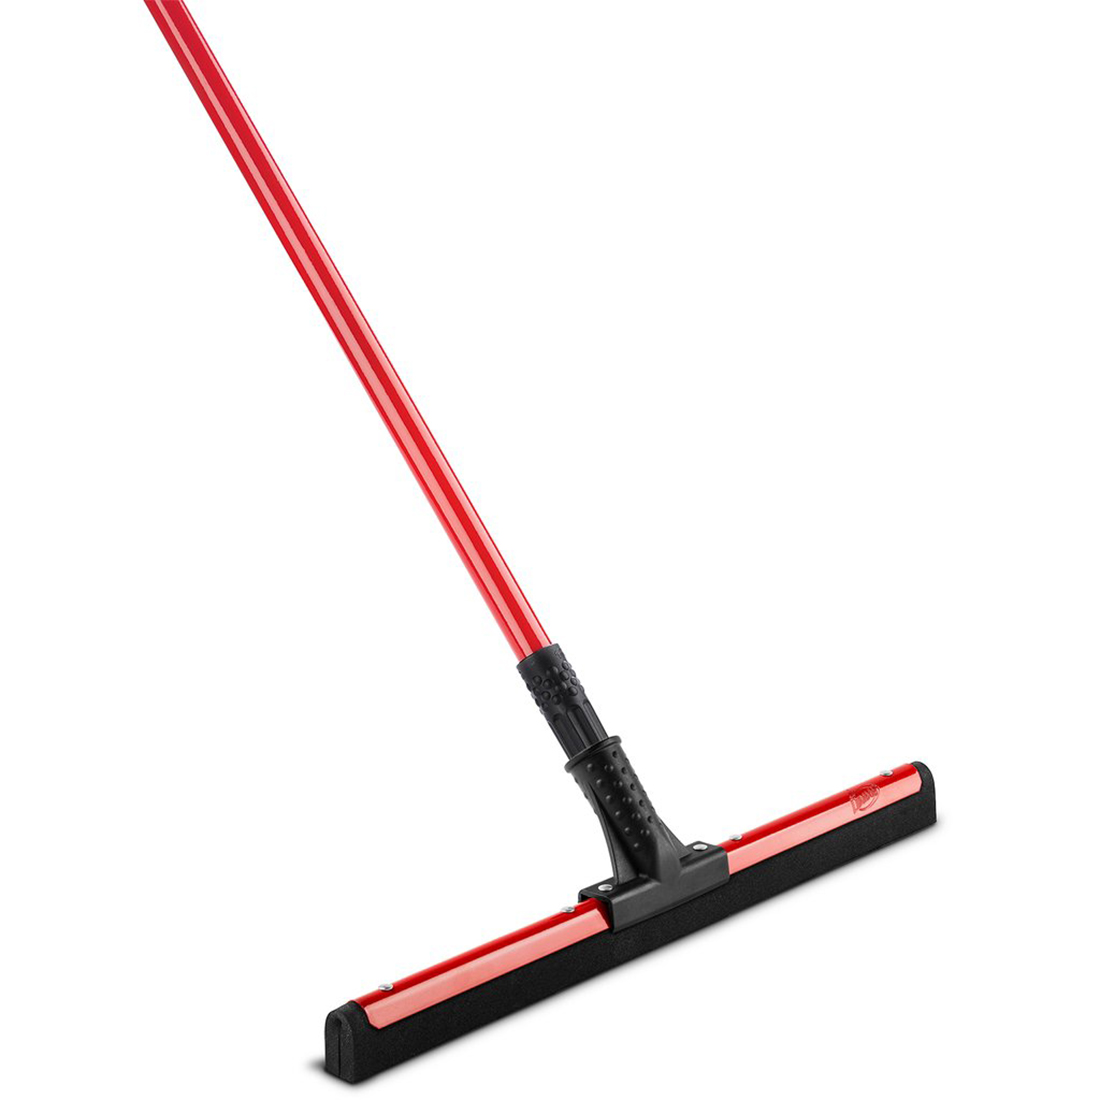 Flex Blade Floor Squeegee,
18&quot;W x 52&quot;H, red threaded
steel handle, with handle grip
and hanger hole (#618), black
closed-cell foam rubber blade,
EACH, 10/21